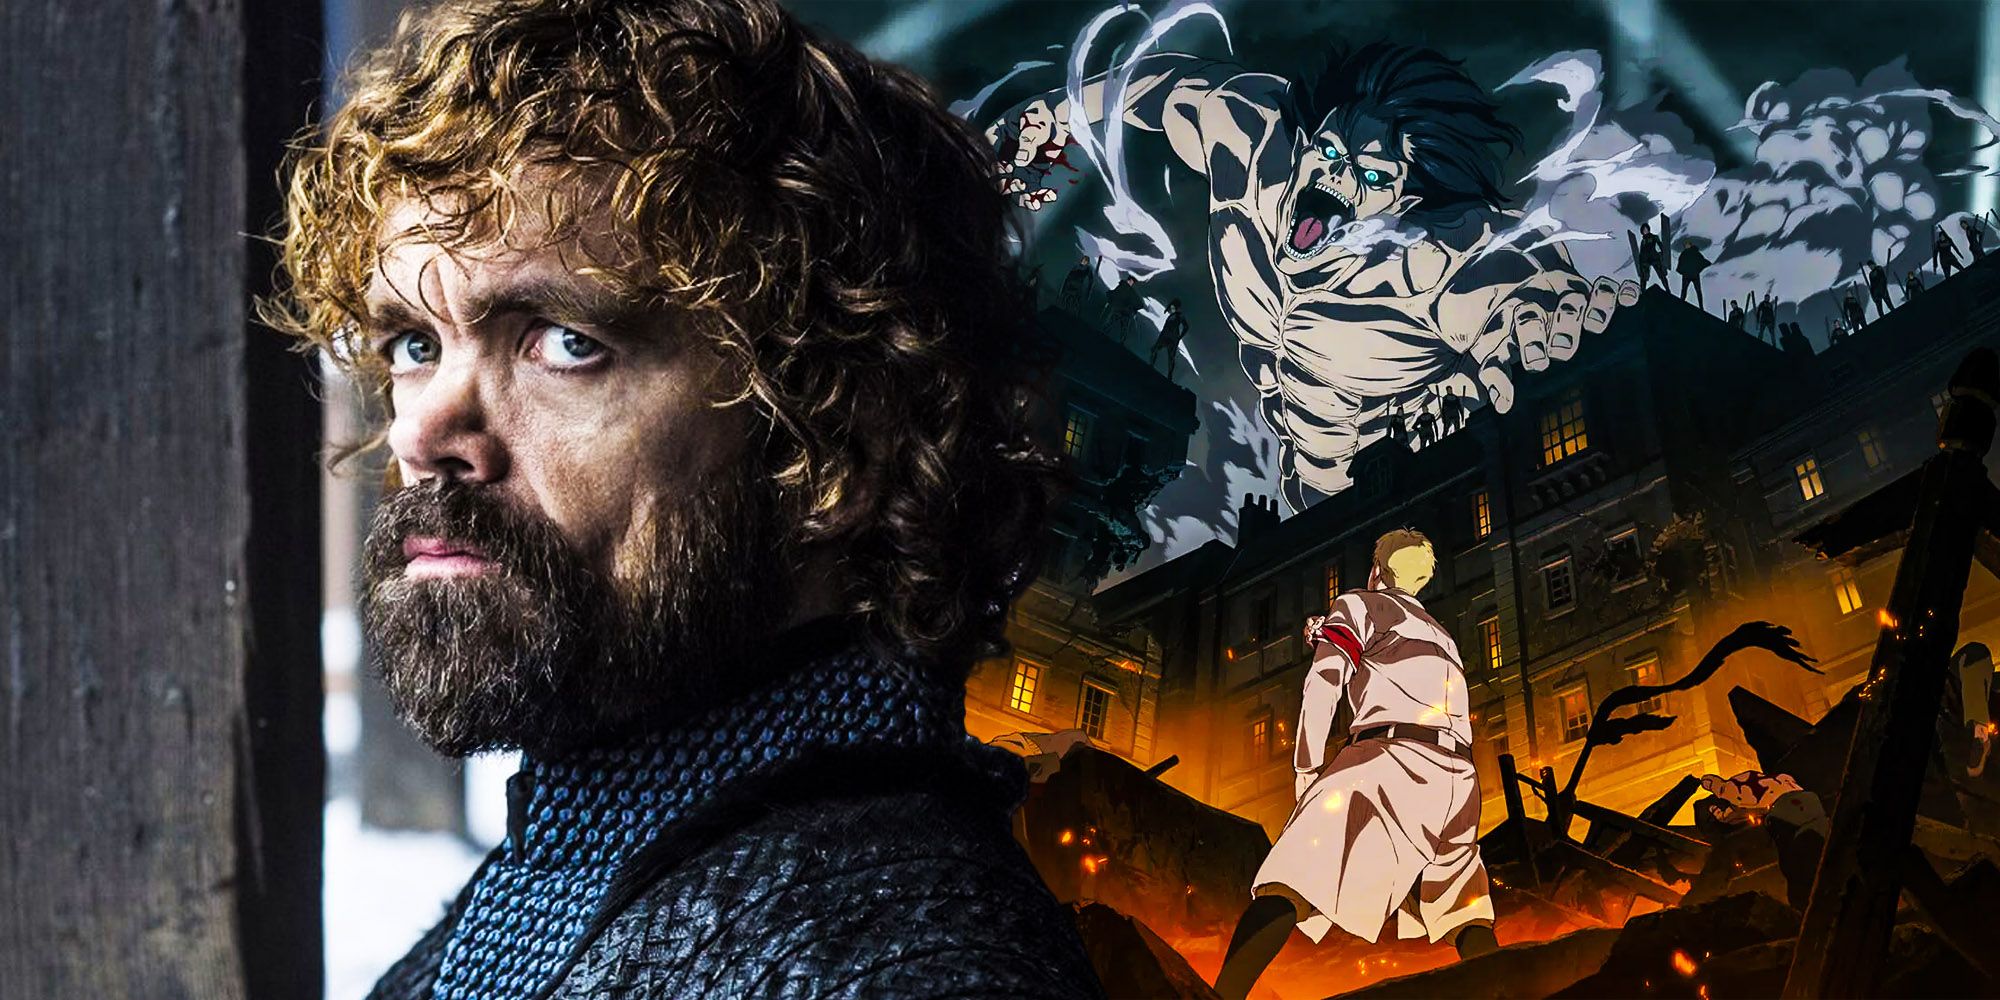 Attack on titan movie would avoid game of thrones trap